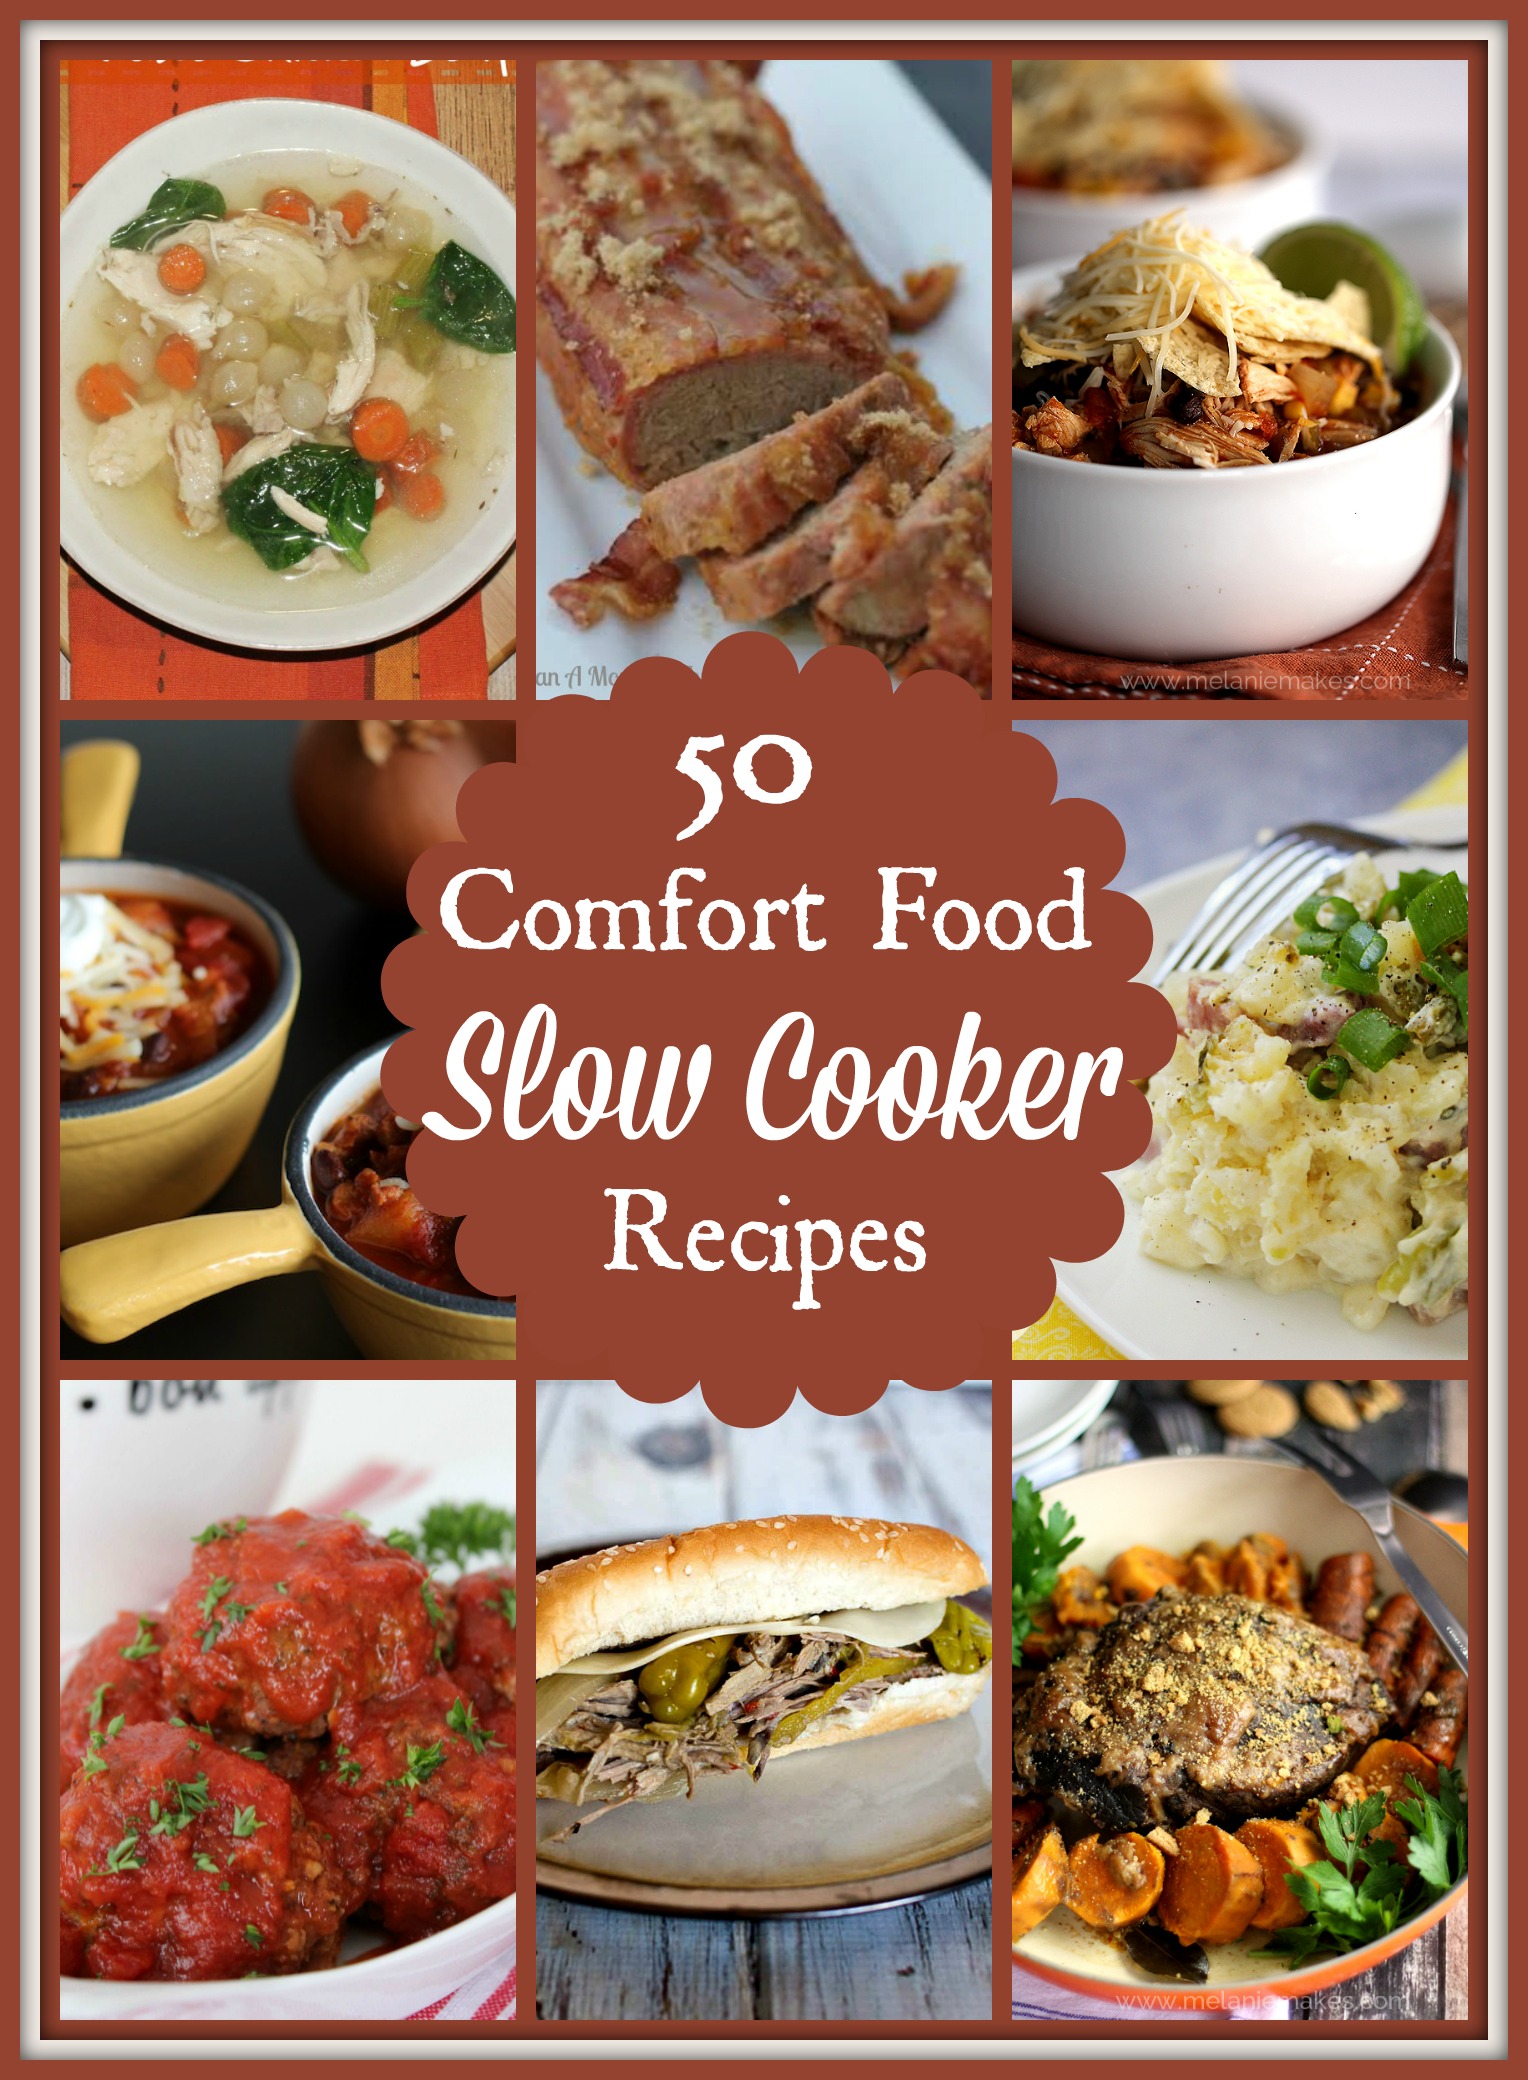 50 Comfort Food Slow Cooker Recipes - Easy comfort food you can make ahead in your crockpot.